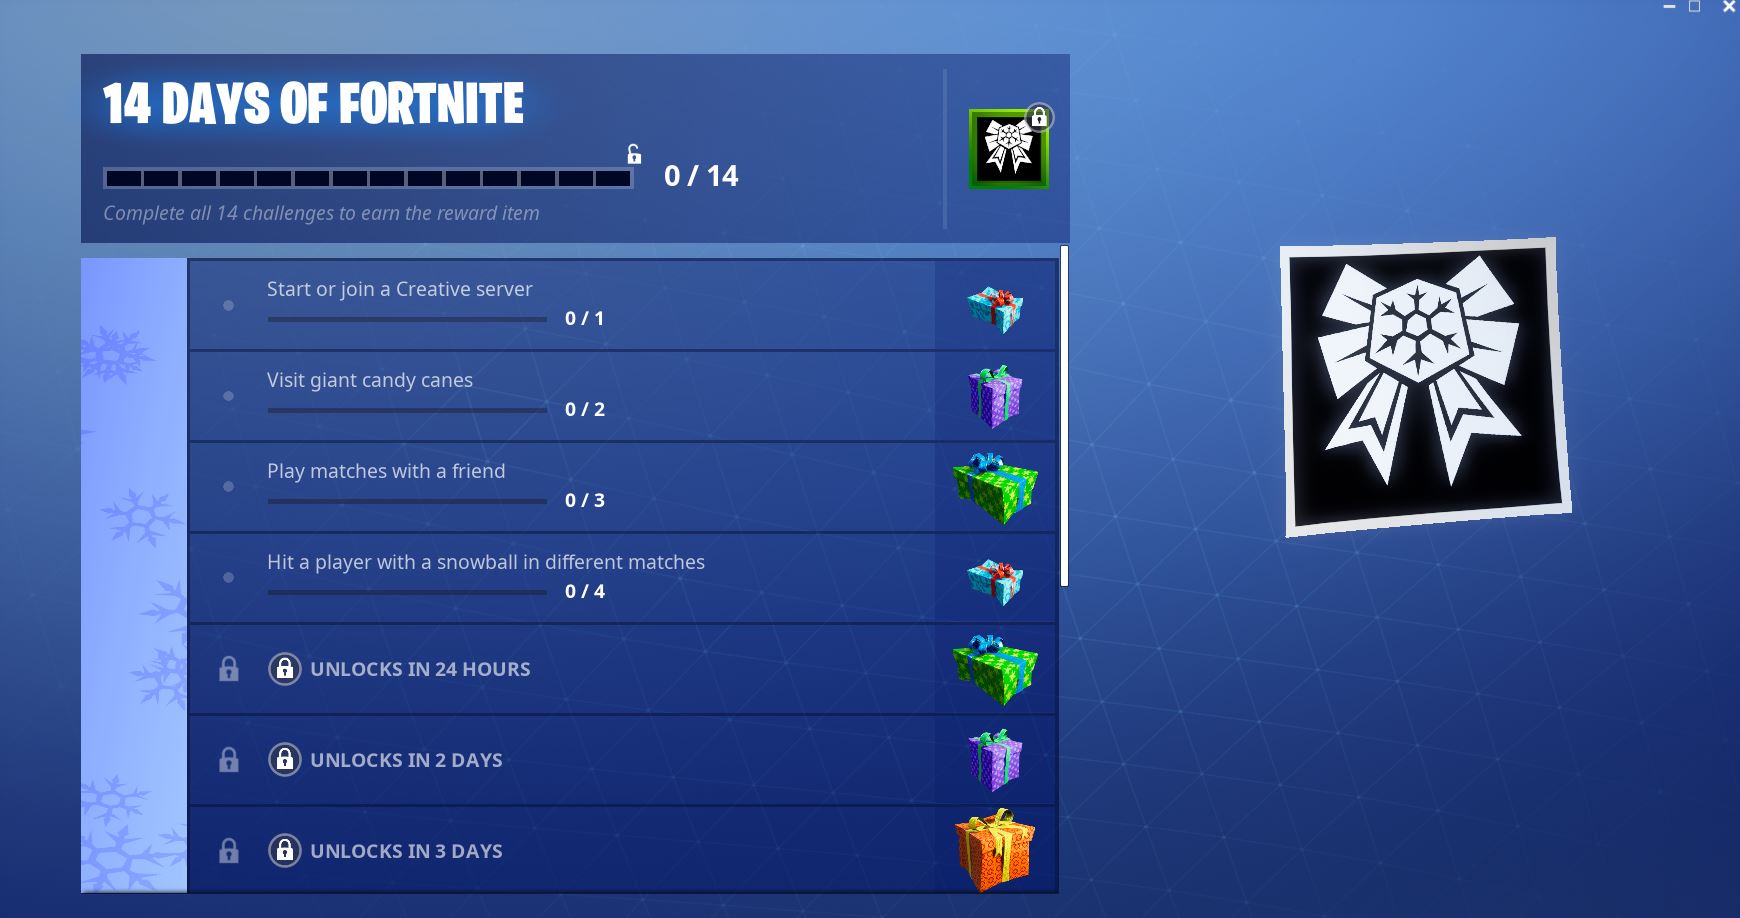 14 days of fortnite day 4 challenges